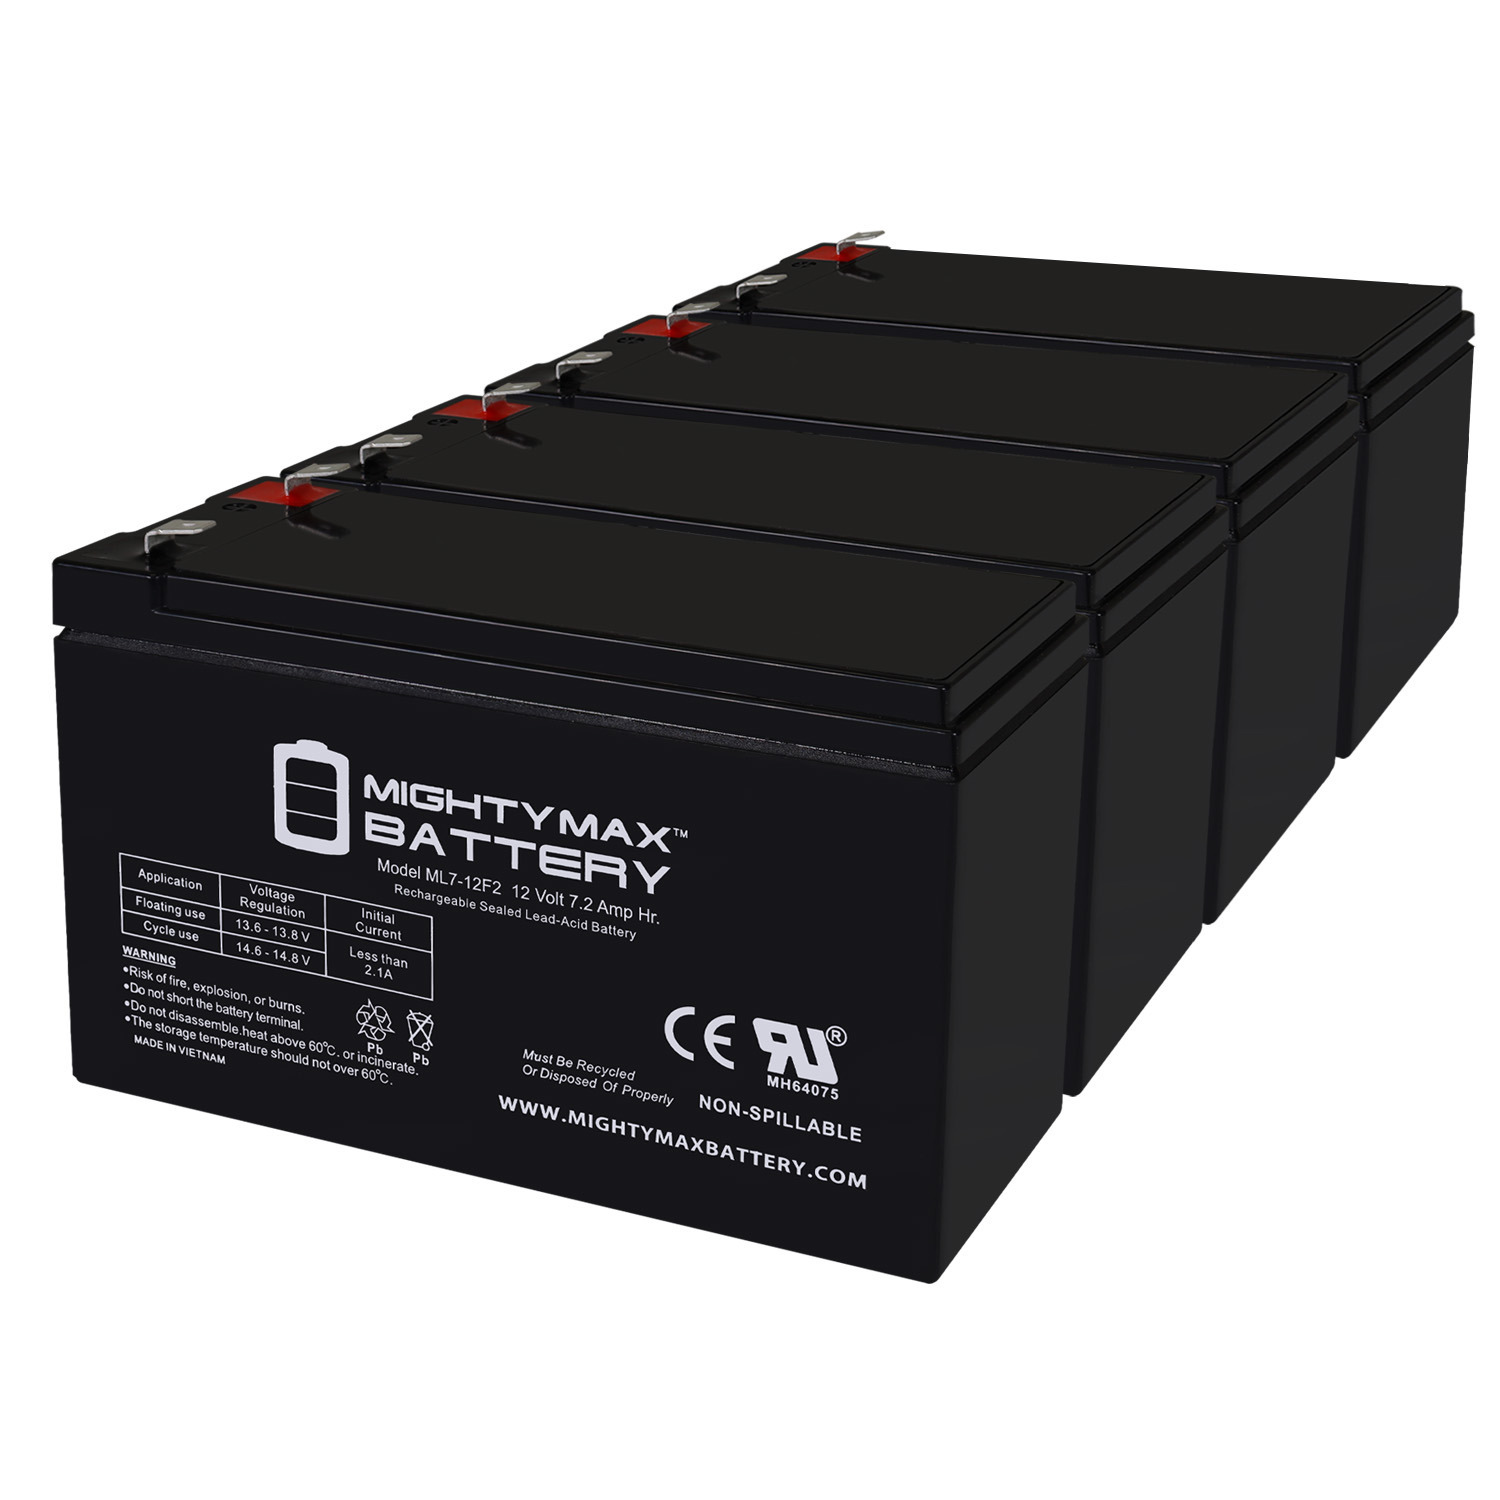 12V 7Ah F2 Replacement Battery for APC UPS SMT750US - 4 Pack